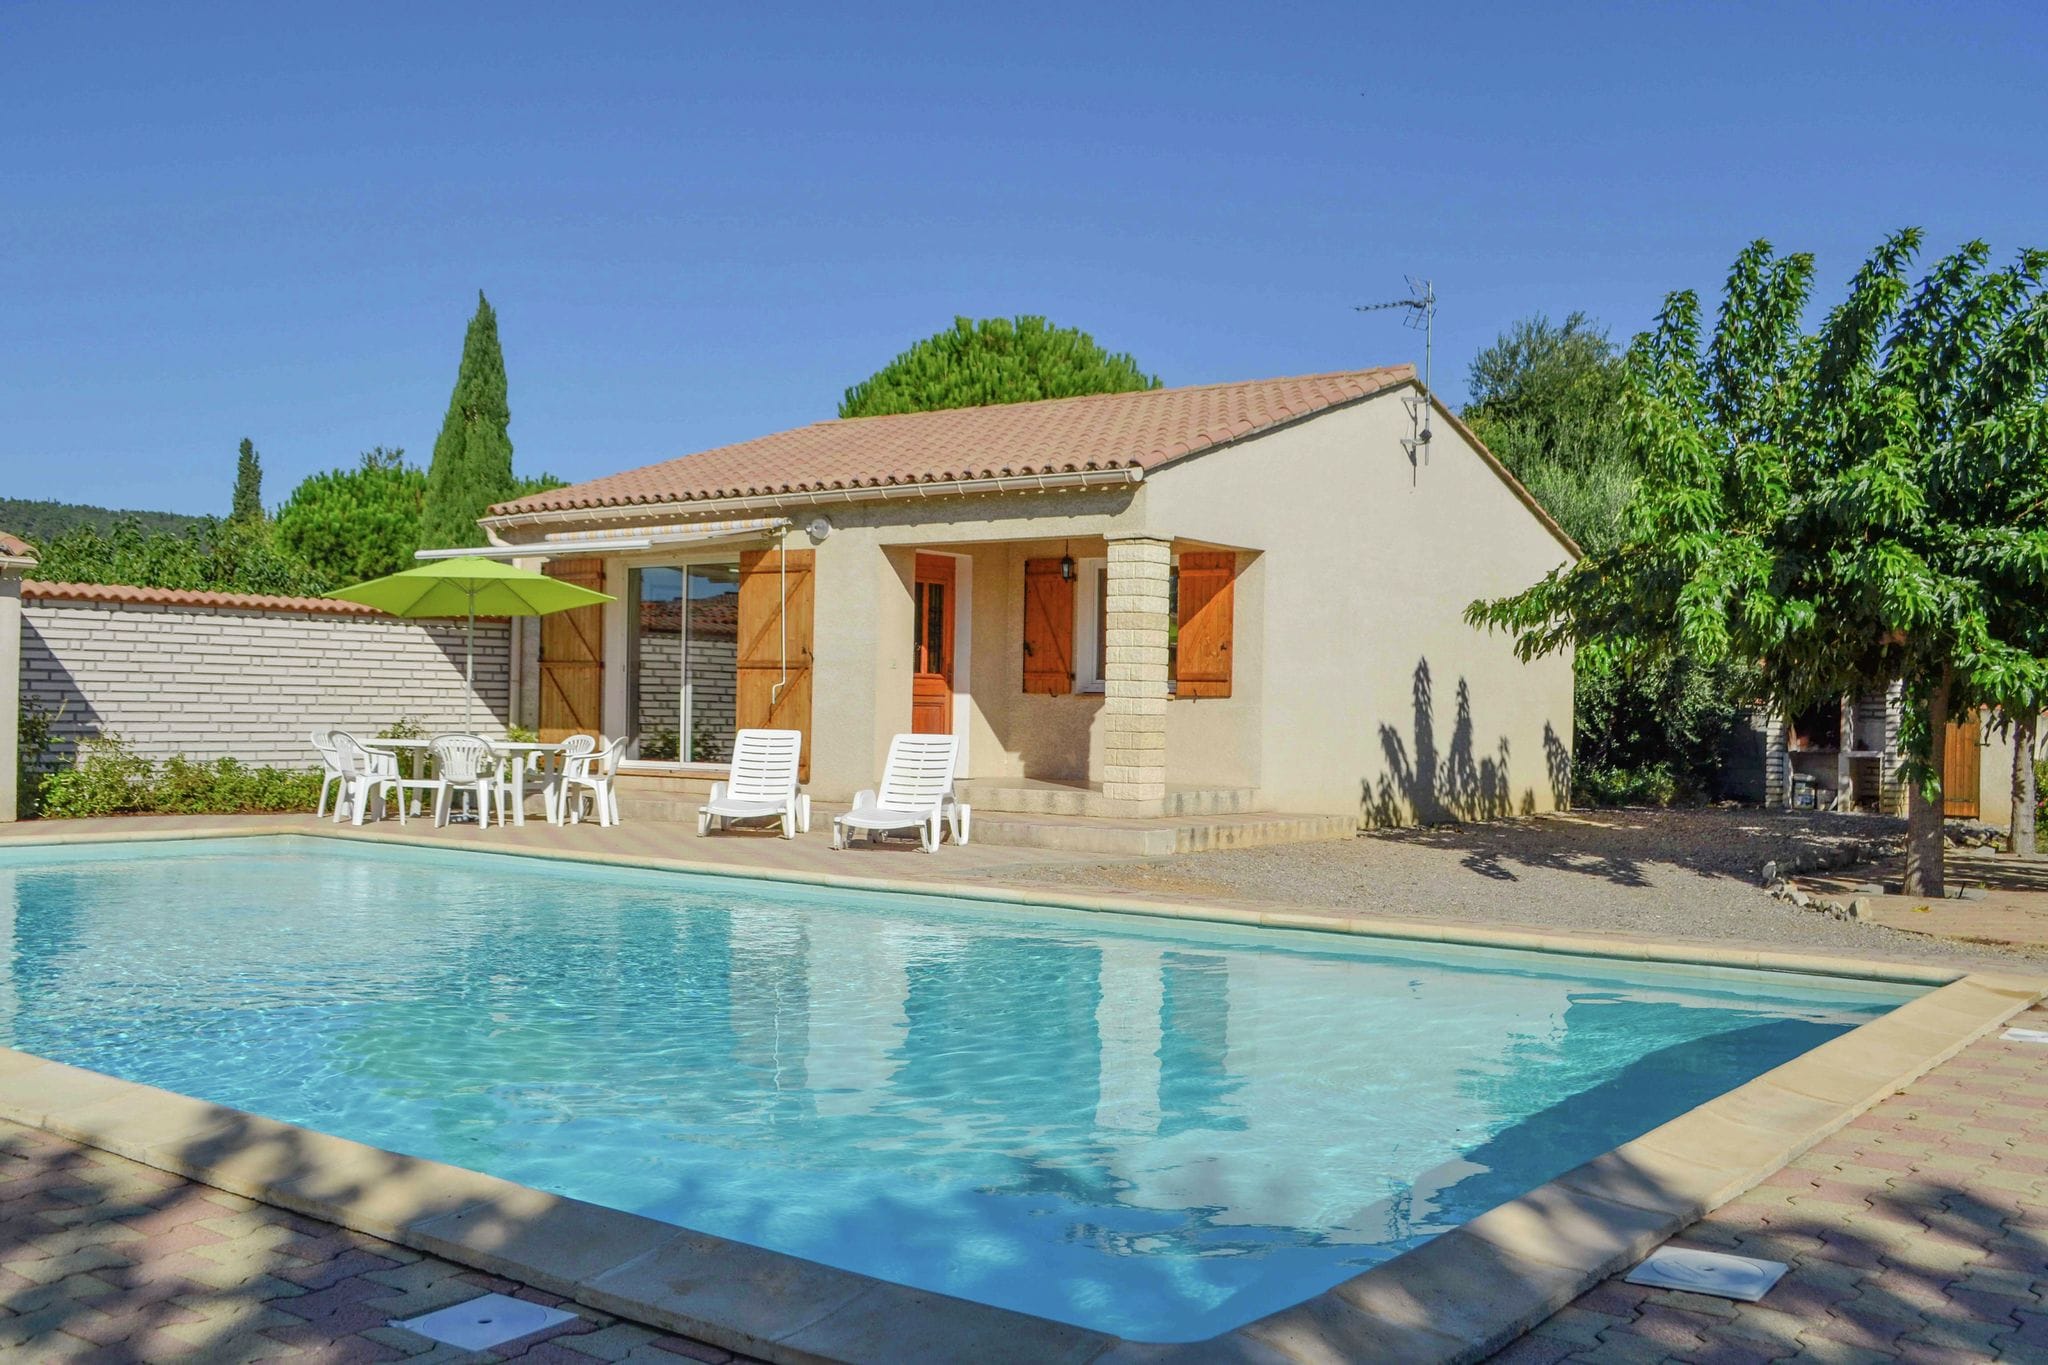 Beautiful Holiday Home, Near Centre. Private Pool. Private Garden. Roofed Terrace